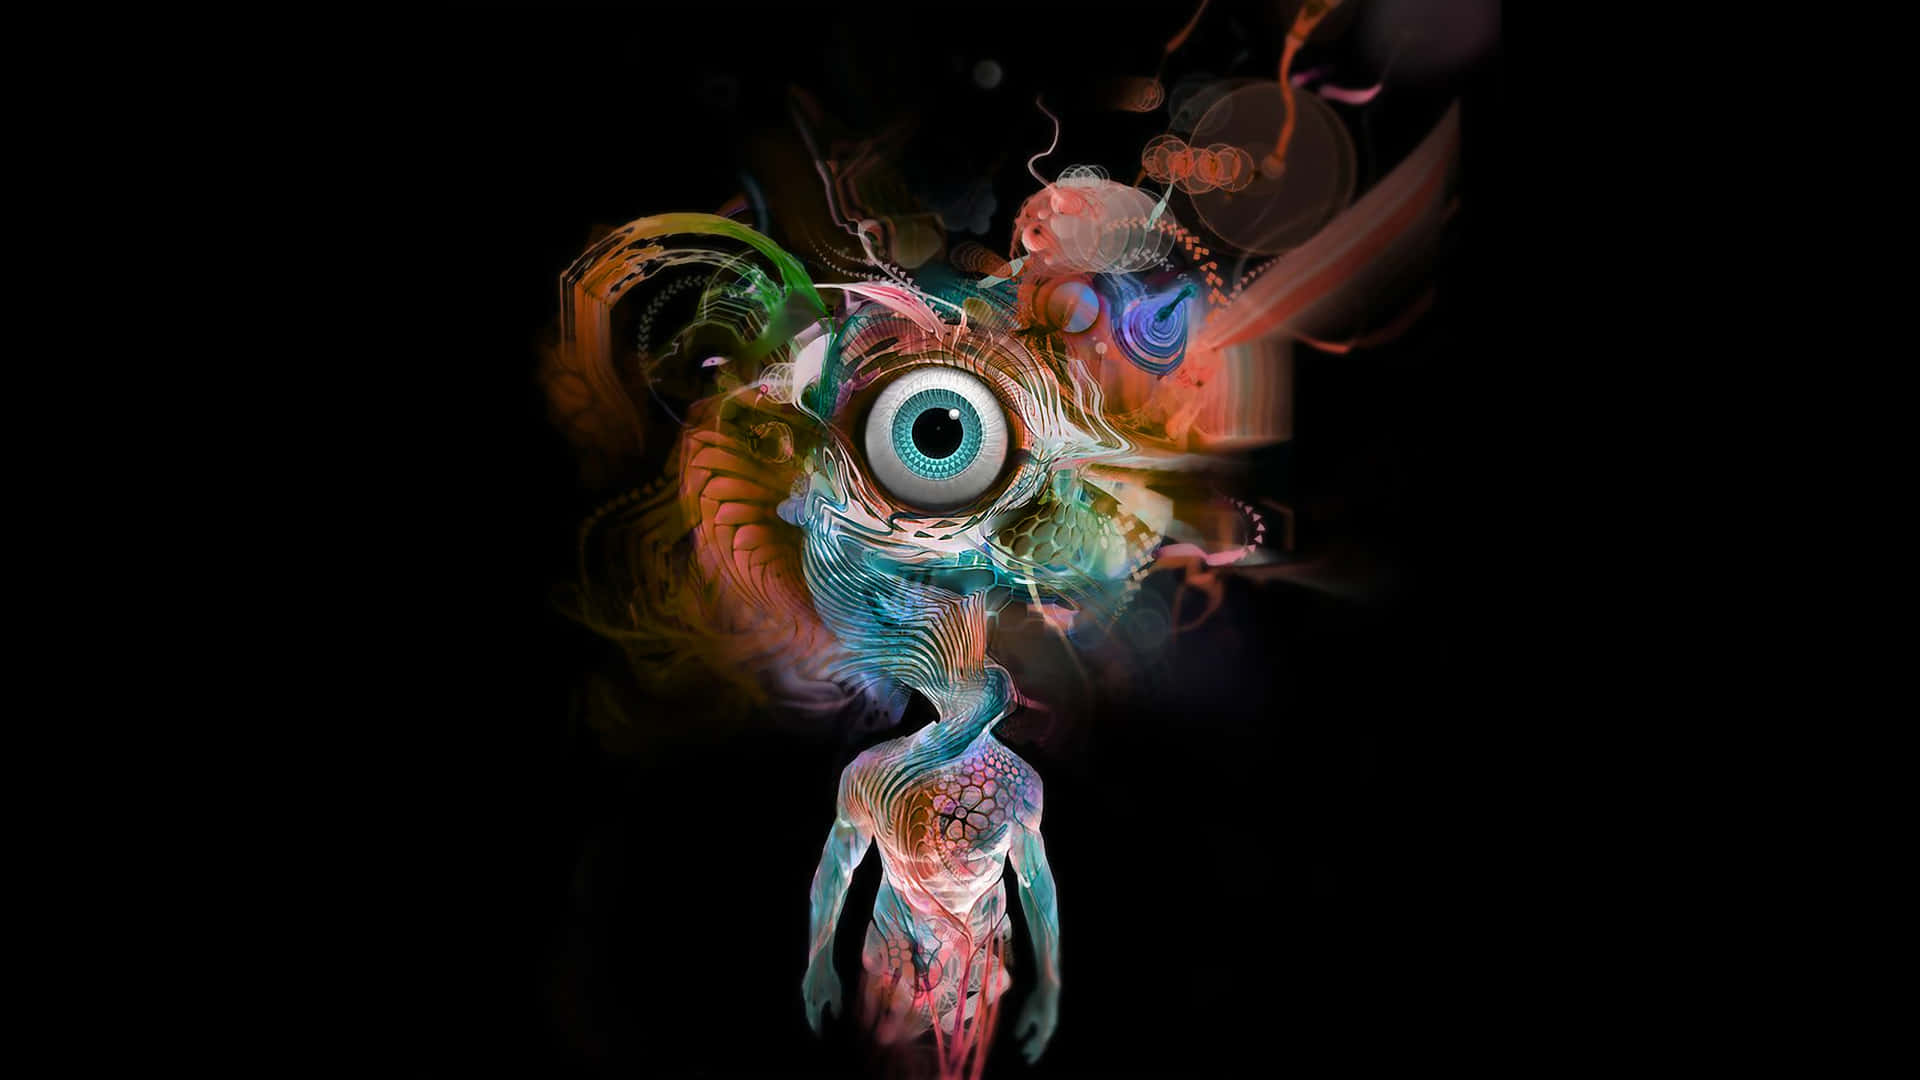 A Colorful Image Of A Person With A Large Eye Wallpaper